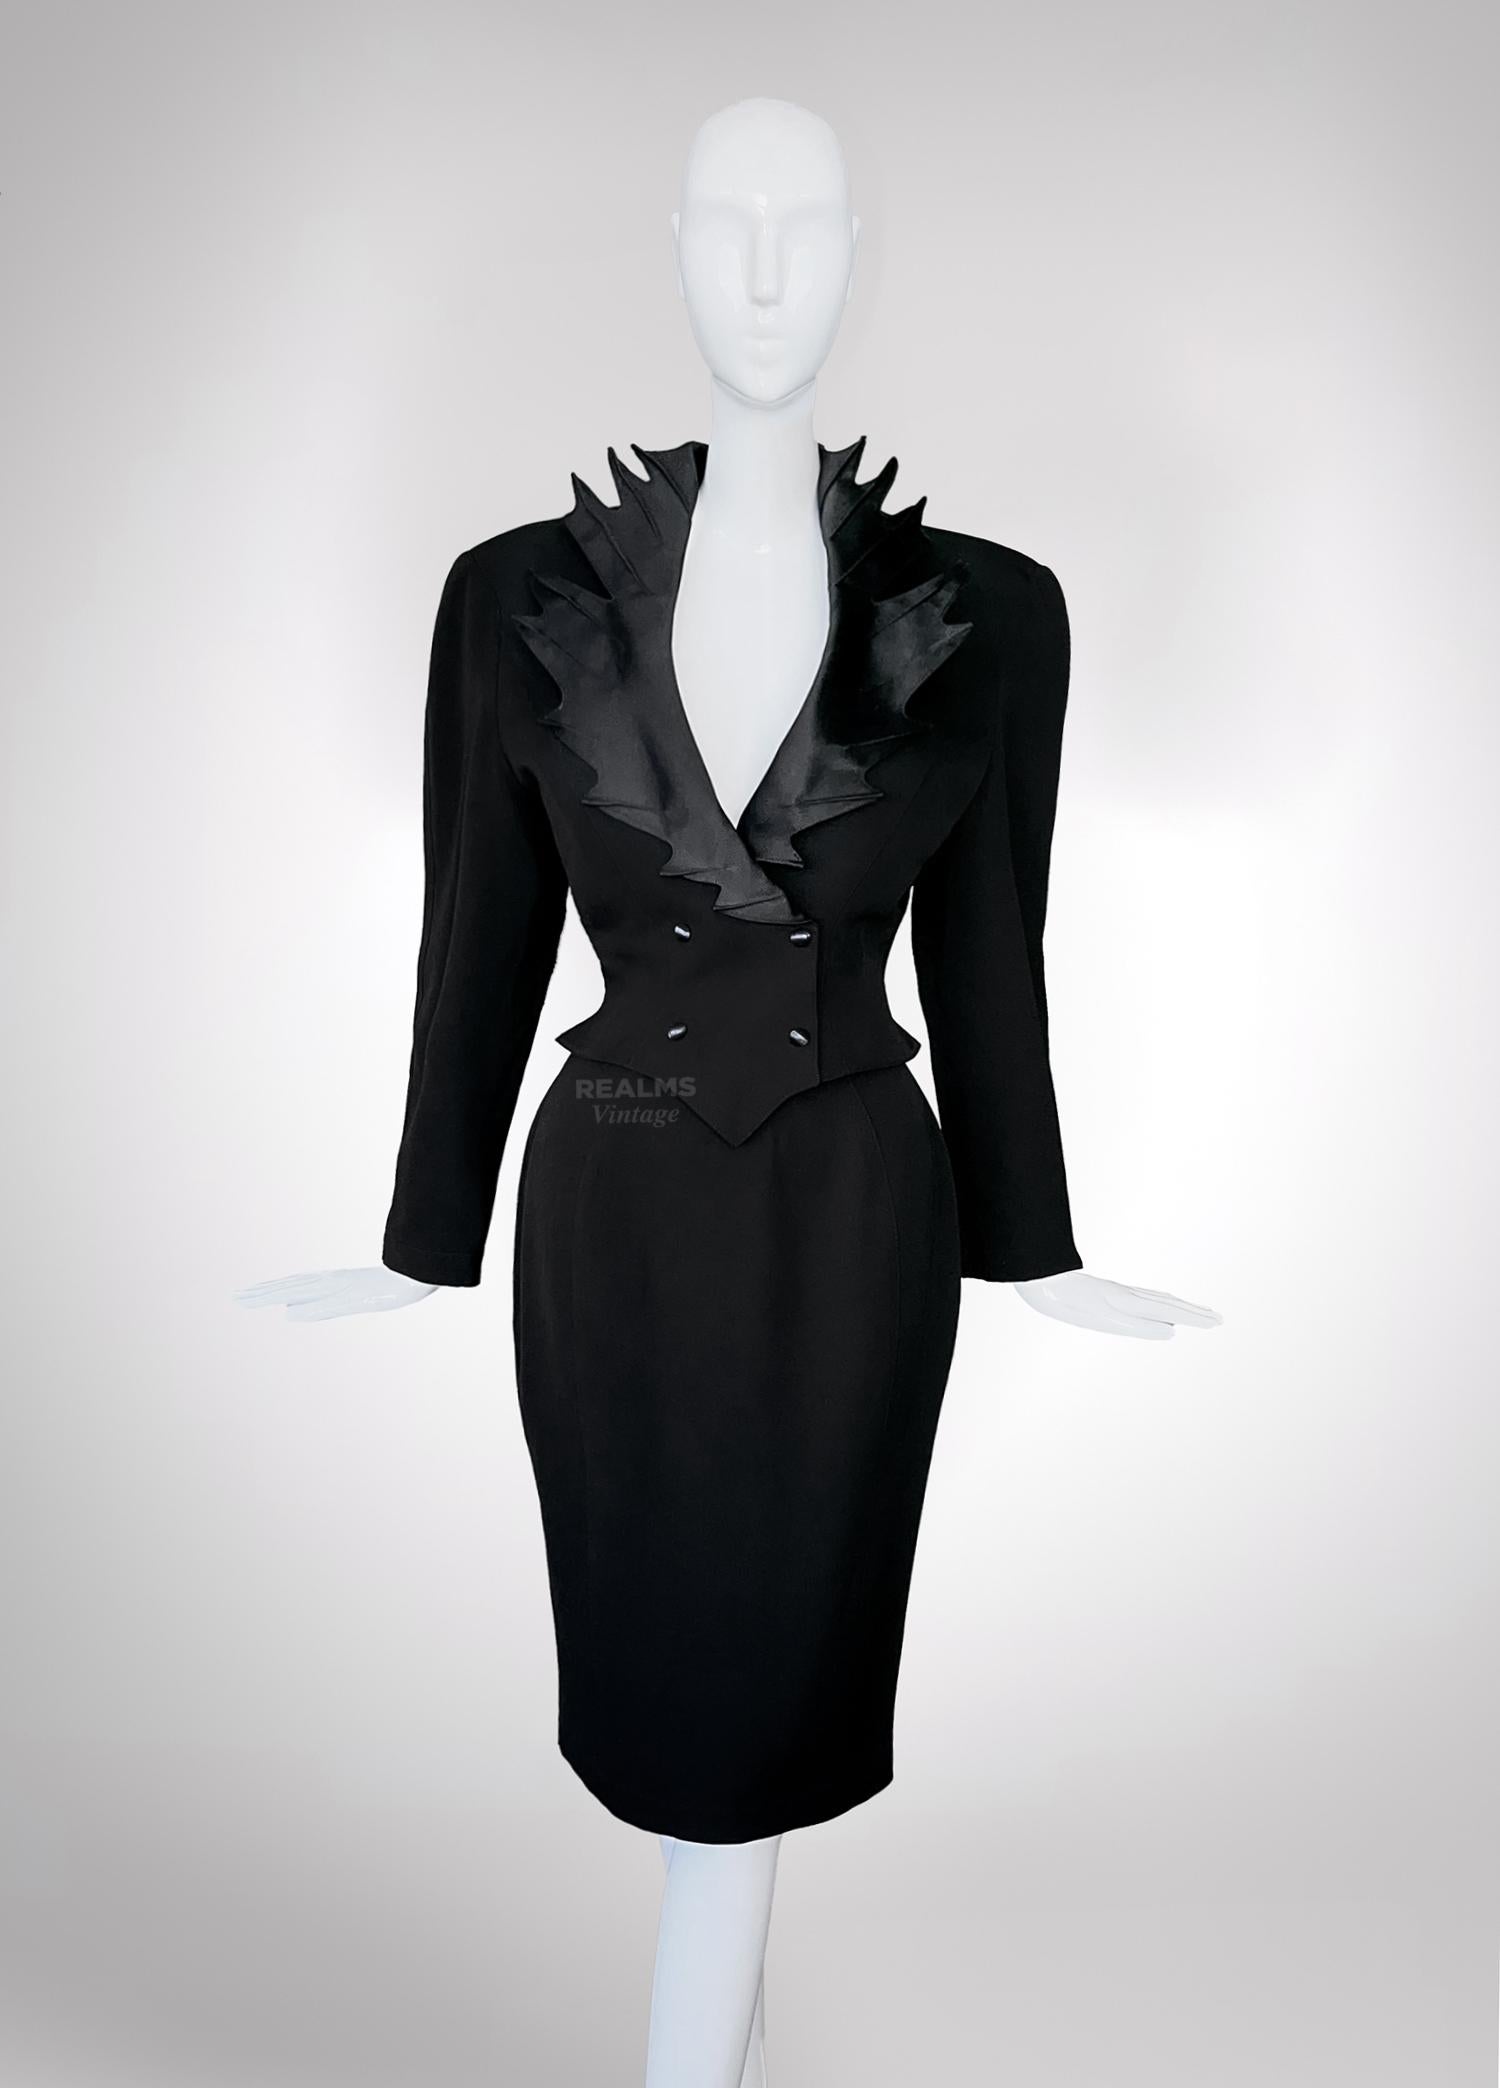 Women's Dramatic Thierry Mugler FW1990 Archival Black Skirt Suit Sculptural For Sale